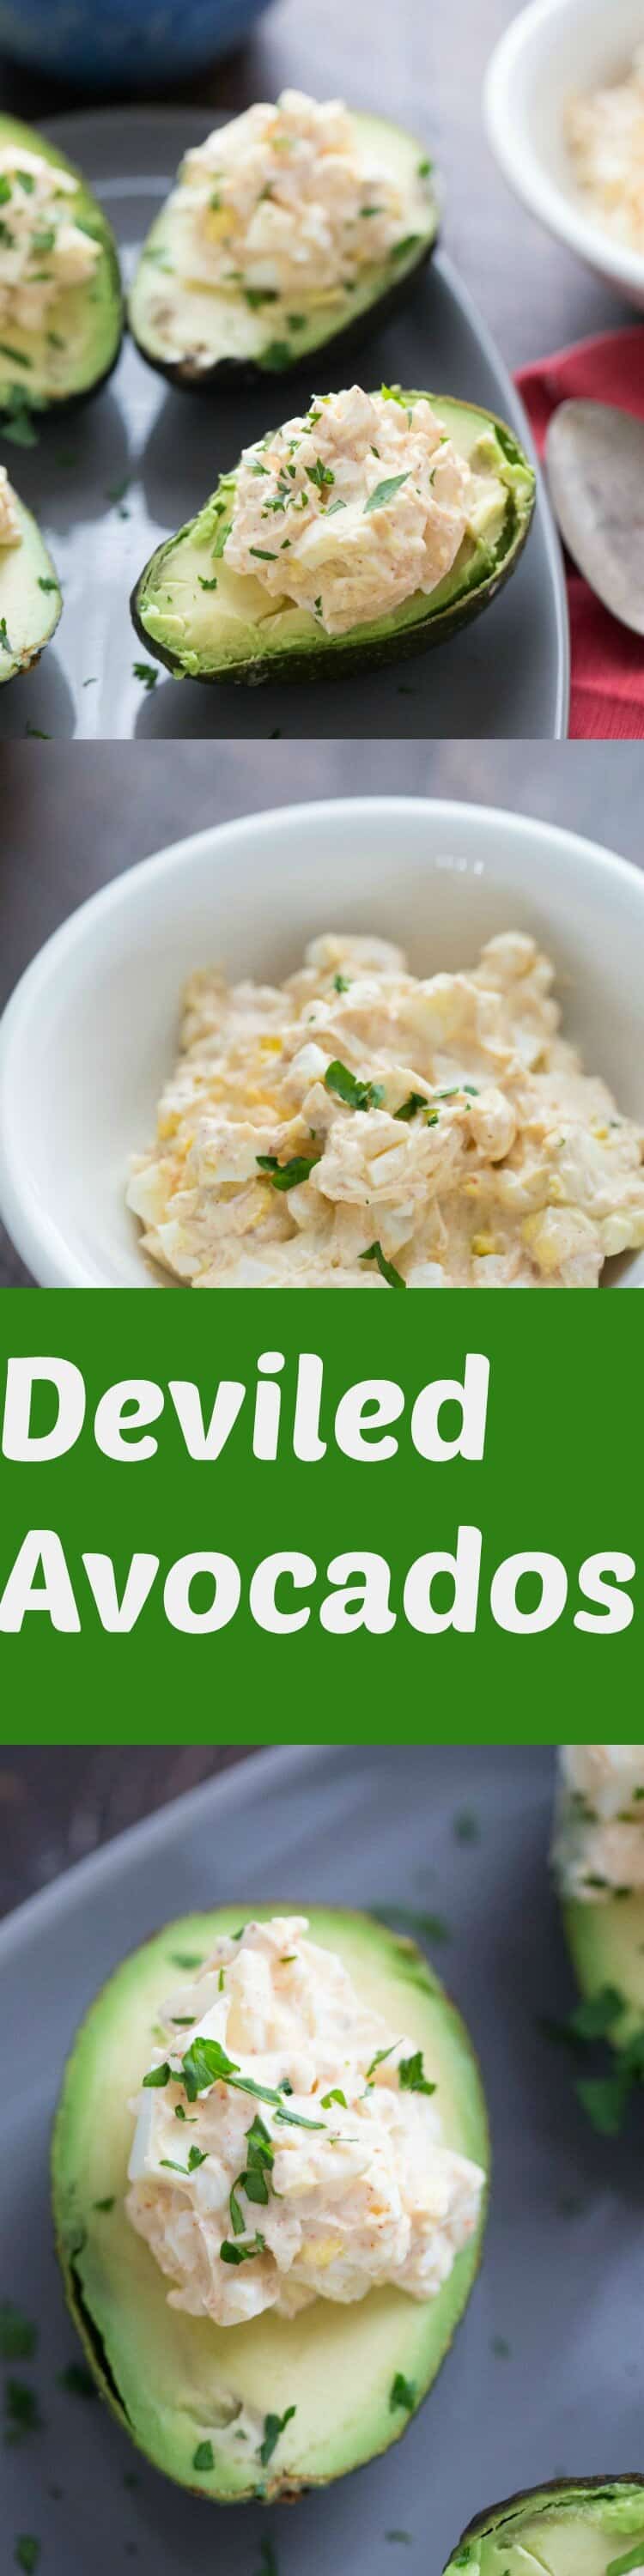 Deviled egg avocados make a healthy, delicious and filling alternative to deviled eggs! These avocados make a light and quick snack or meal!